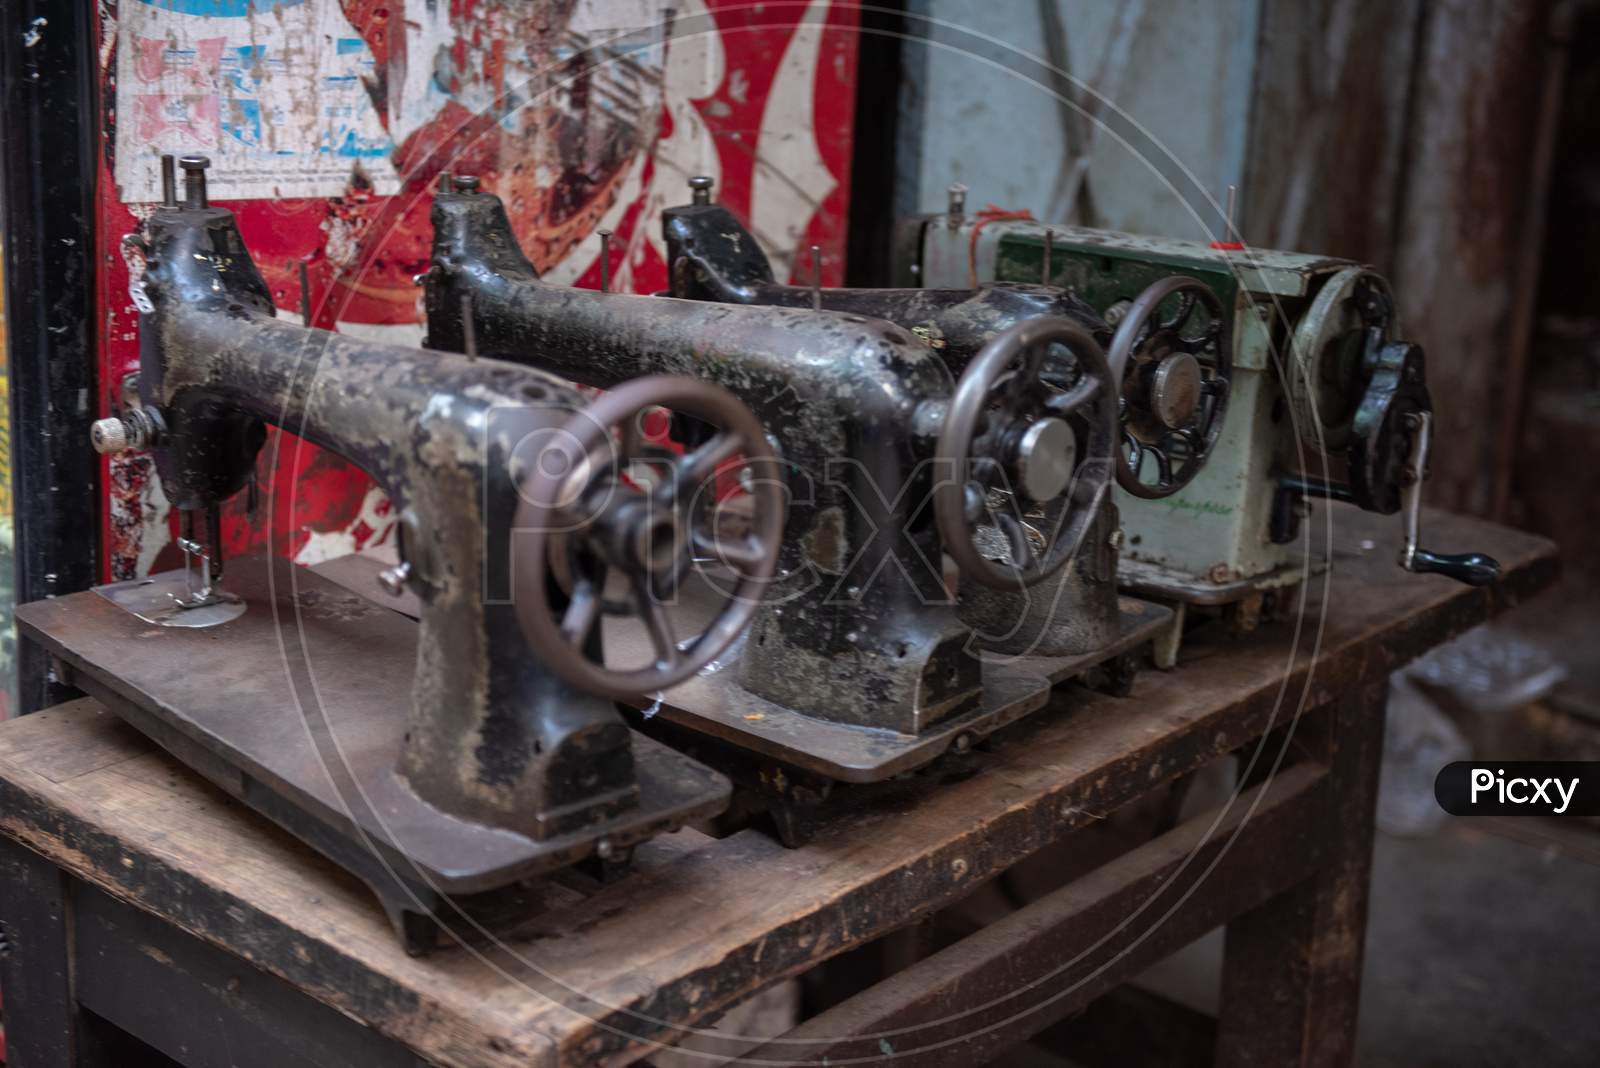 Ancient sewing machines